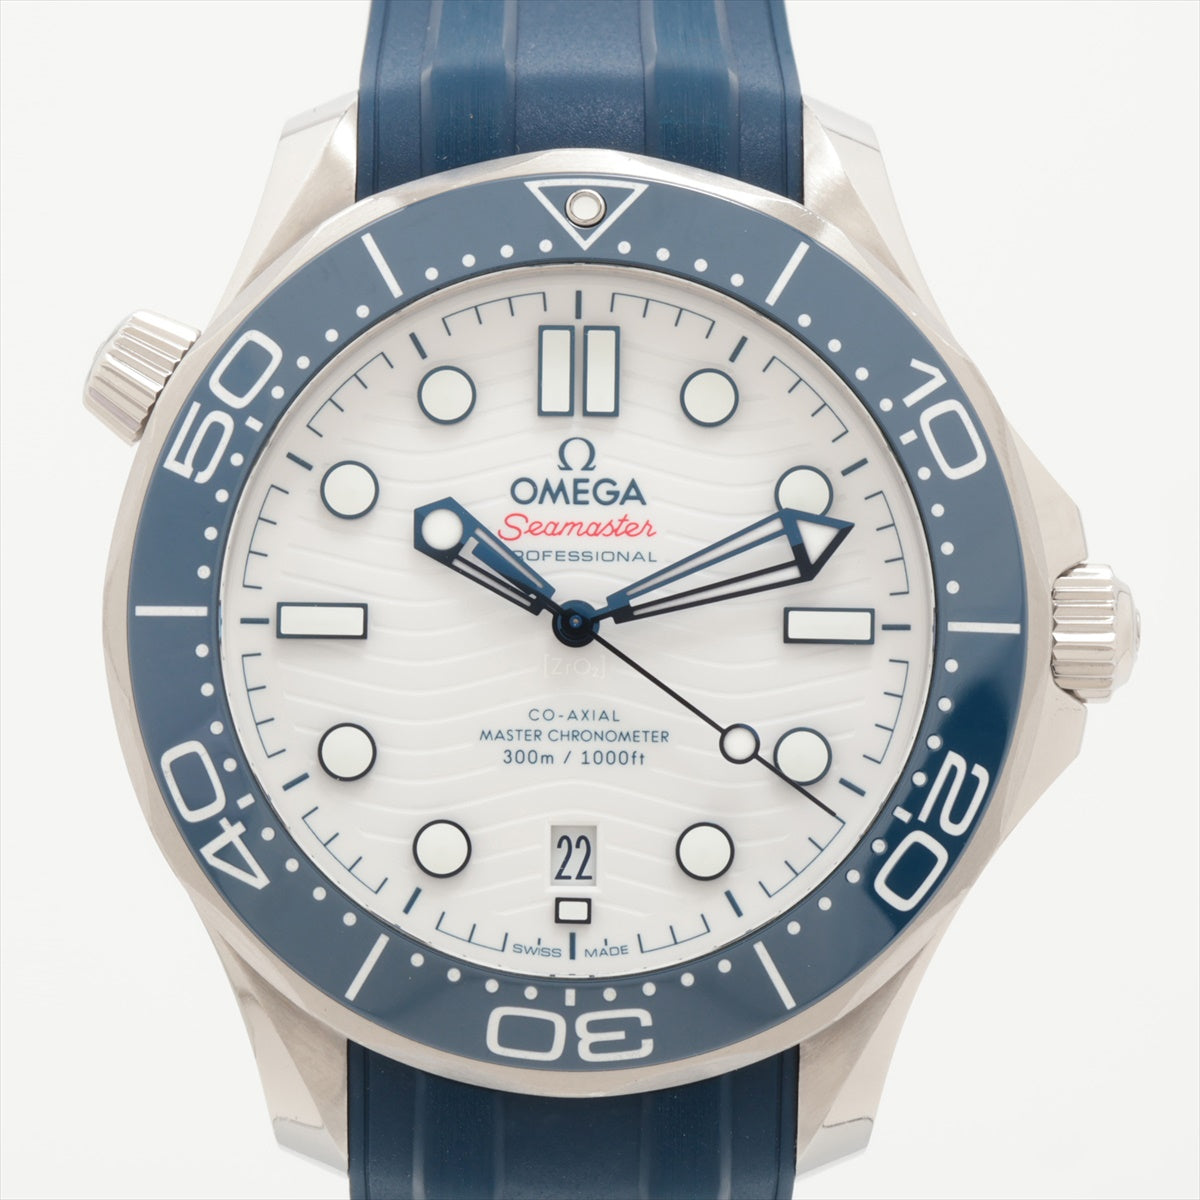 Omega Seamaster Diver 300M Tokyo Olympics 2020 522.30.42.20.04.001 SS & Rubber AT White Dial 2 Extra Links